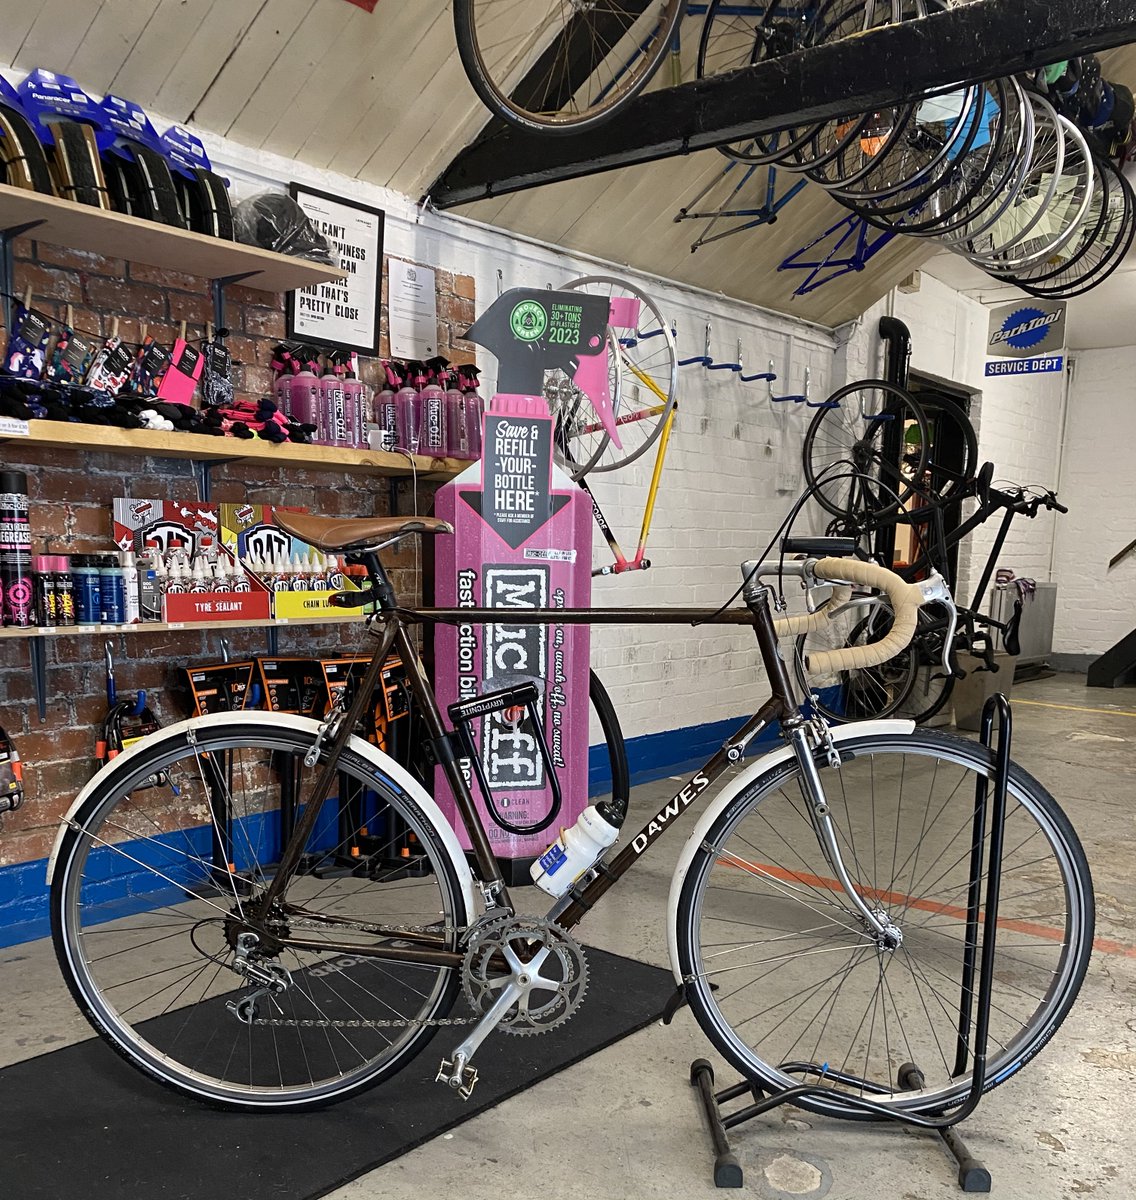 We really enjoyed making this Dawes look great again! #dawes #longdistancecycling #touringbicycle